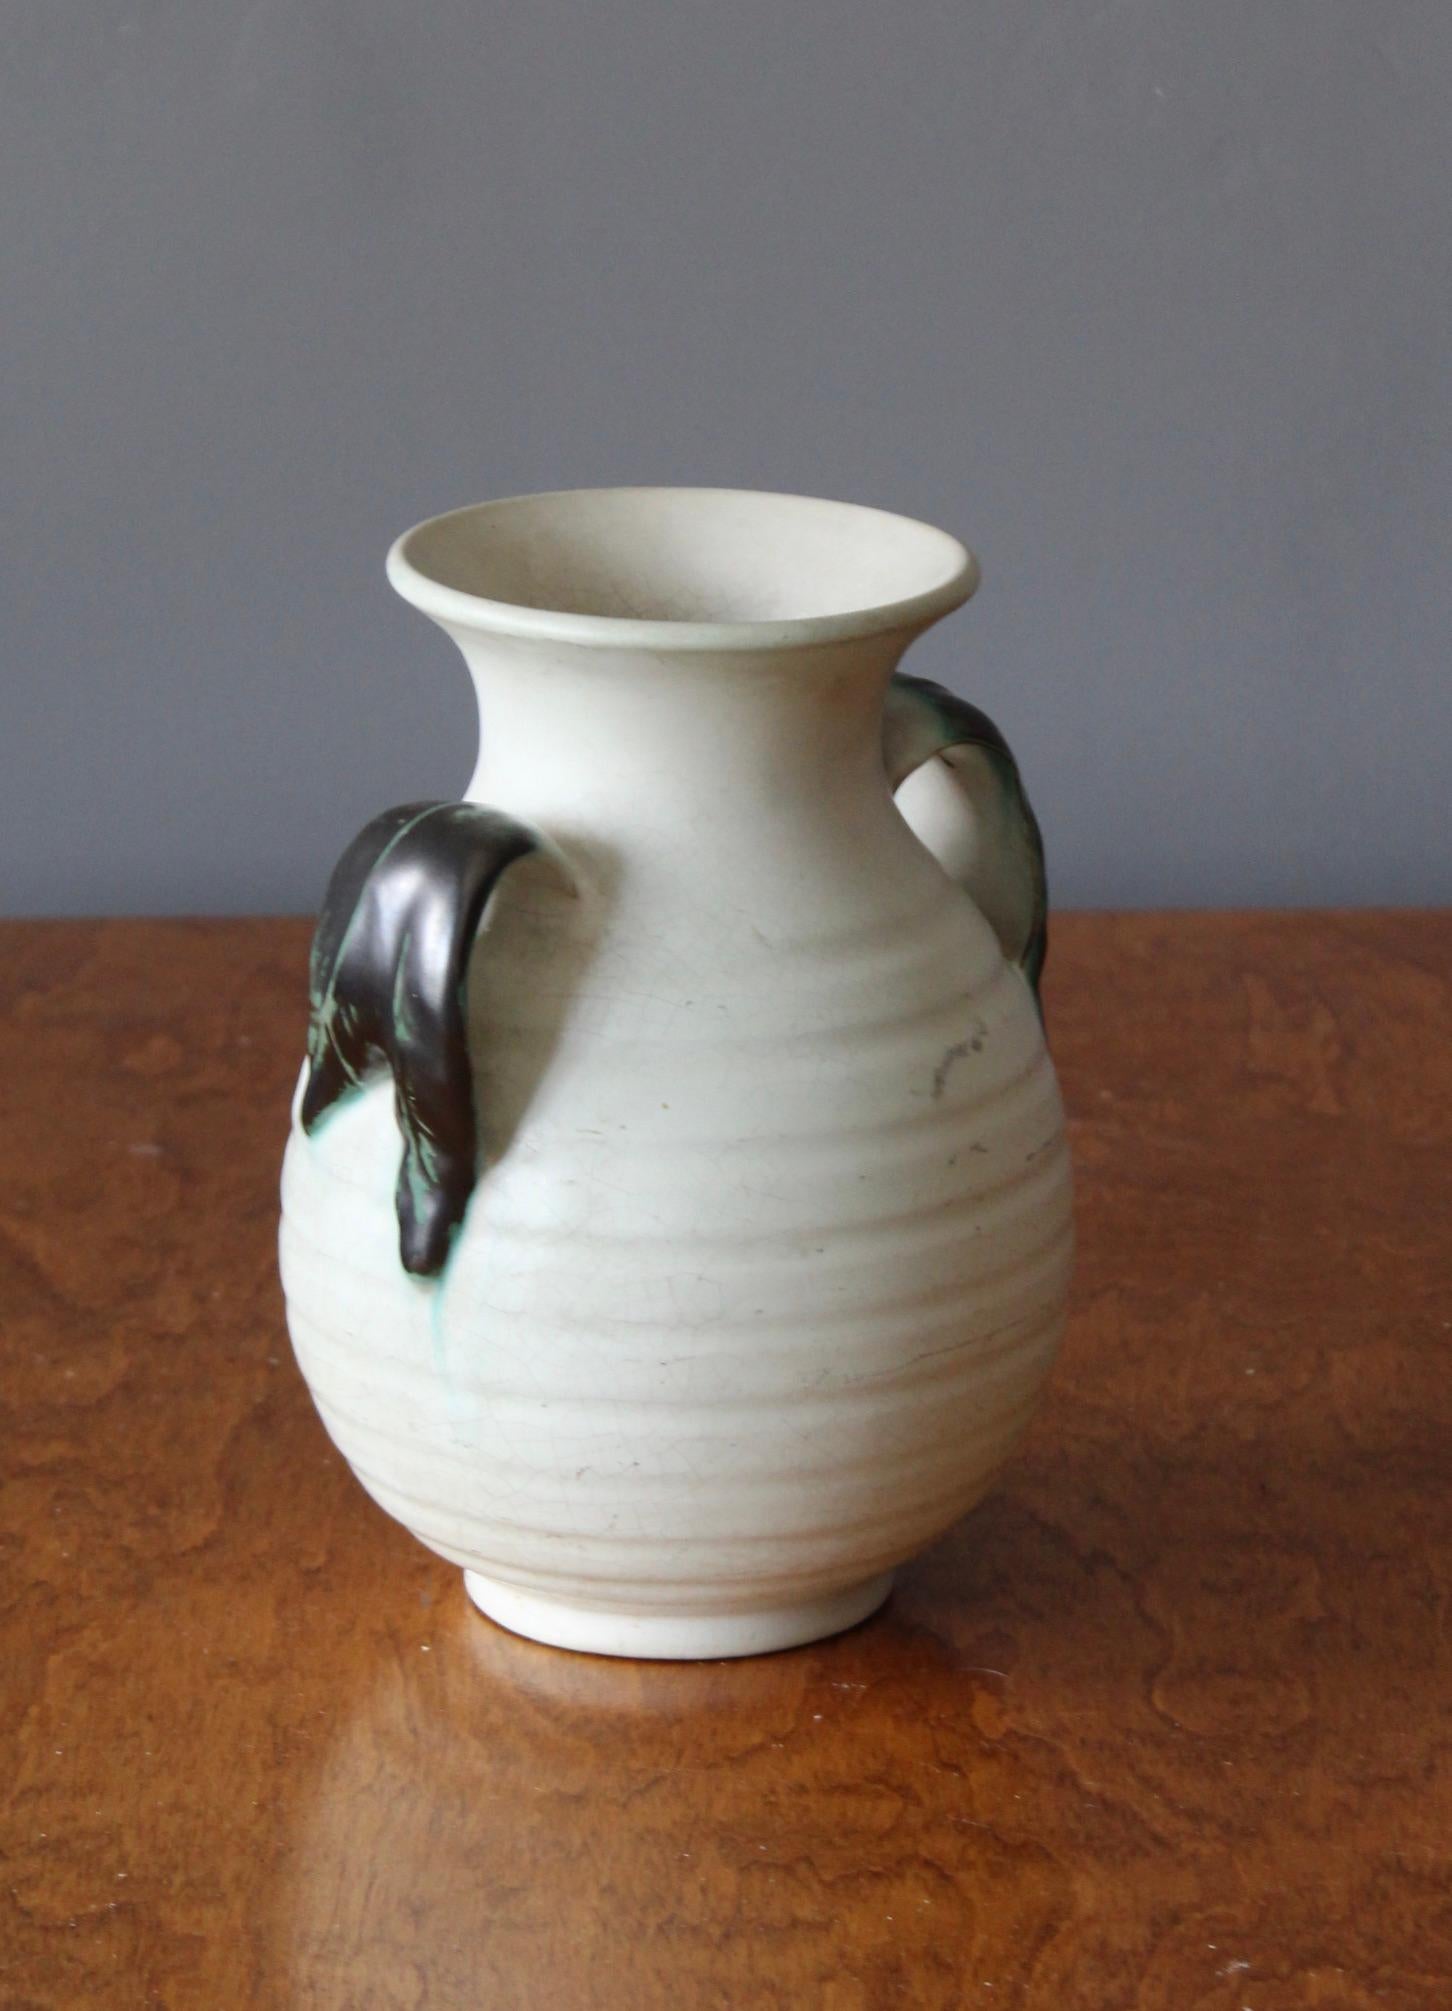 An early modernist vase. Produced by Upsala-Ekeby, Sweden, 1940s. Earthenware. Labeled.

Other designers of the period include Ettore Sottsass, Carl Harry Stålhane, Lisa Larsson, Axel Salto, and Arne Bang.